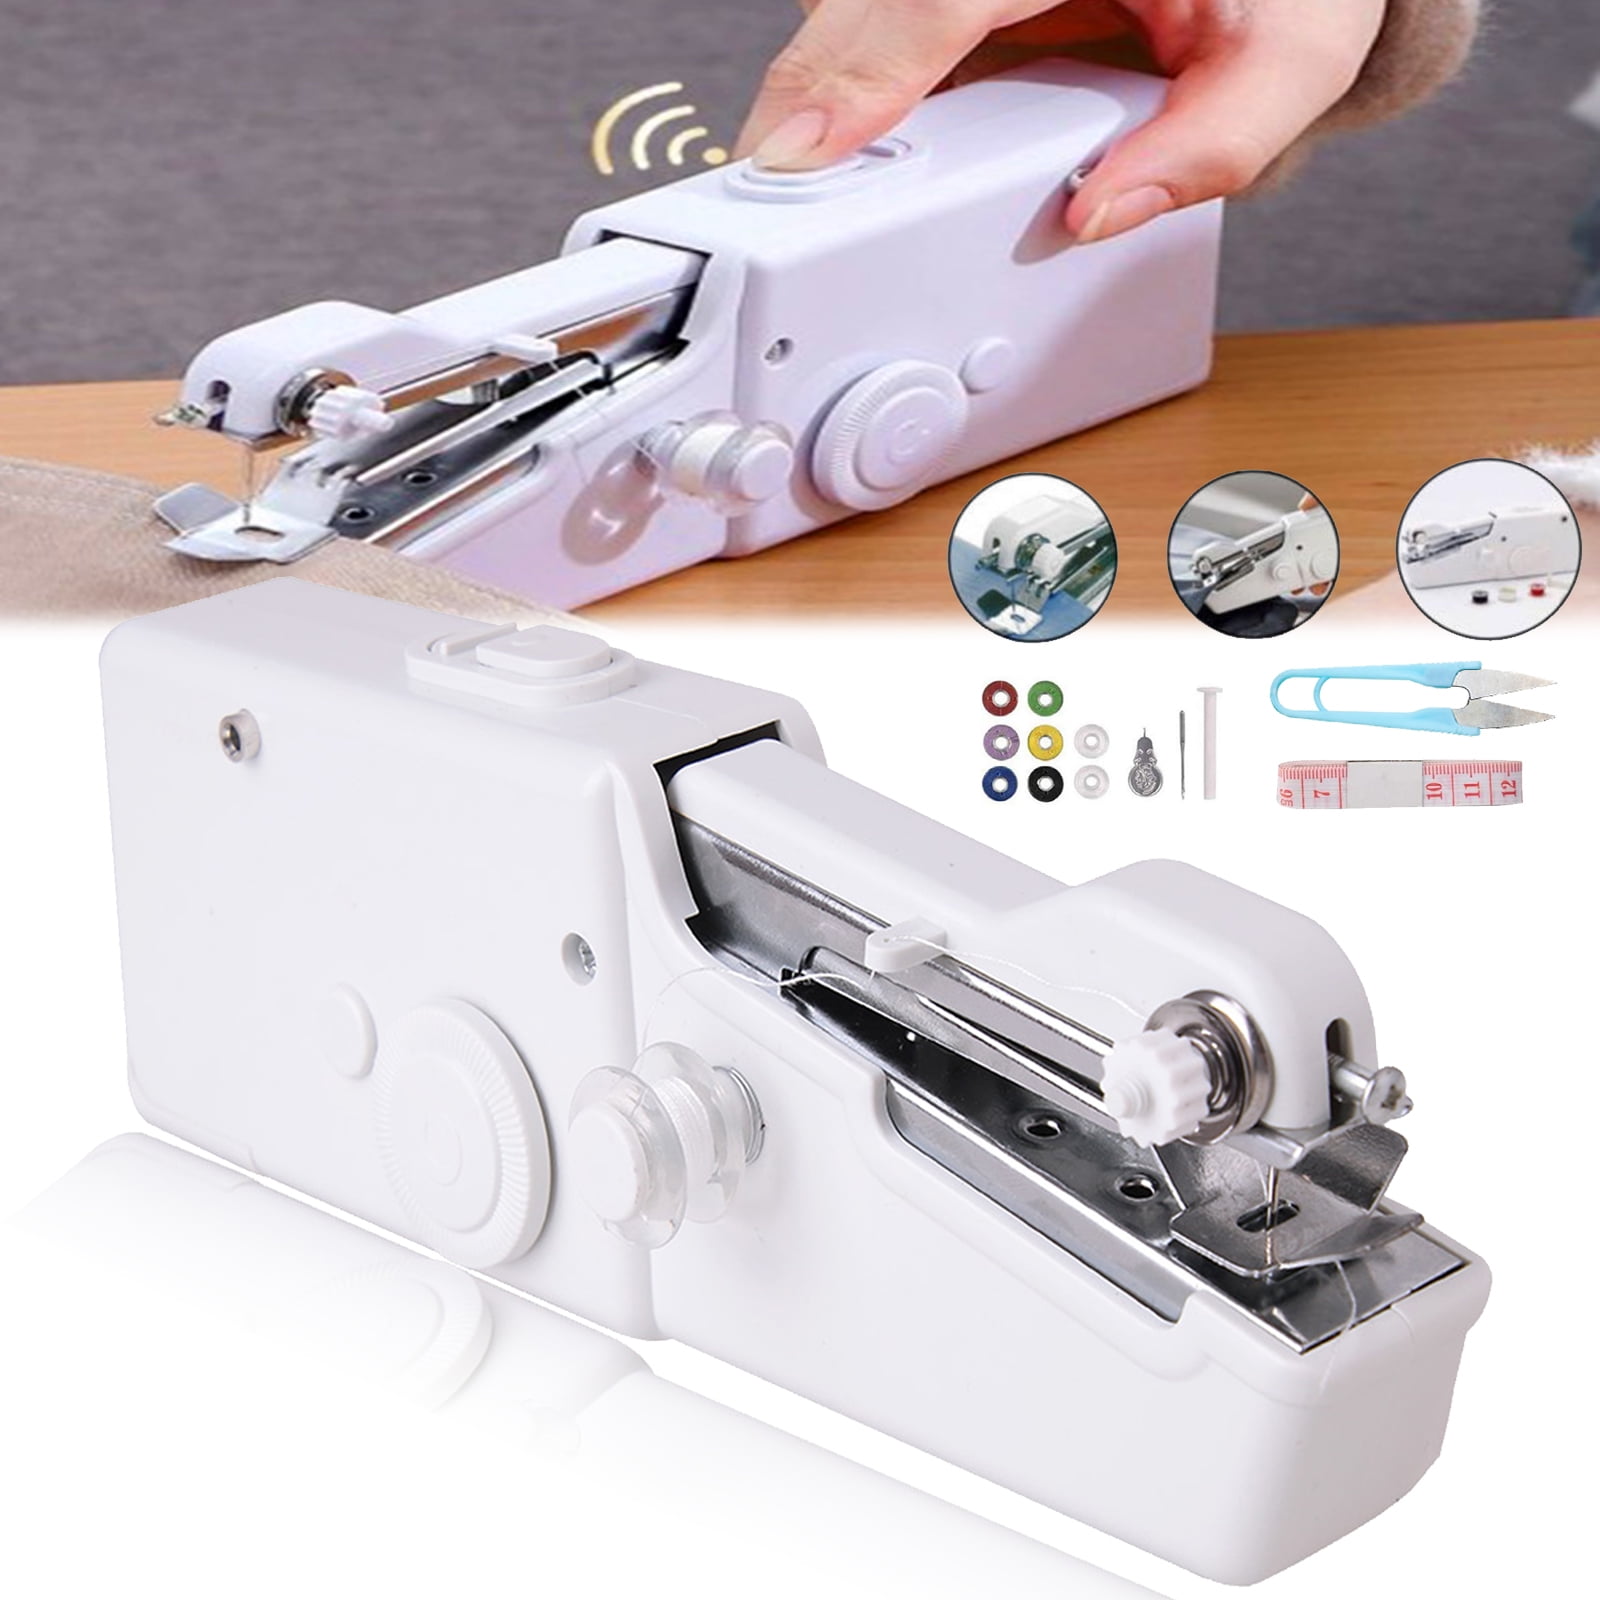 New Portable Household Hand Stitch Electric Mini Handheld Set Sewing Machine Mini Stitching Machine Electric Stitch Household Tool for Fabric Clothing Sewing Home Travel Quick Repairs Crafts 